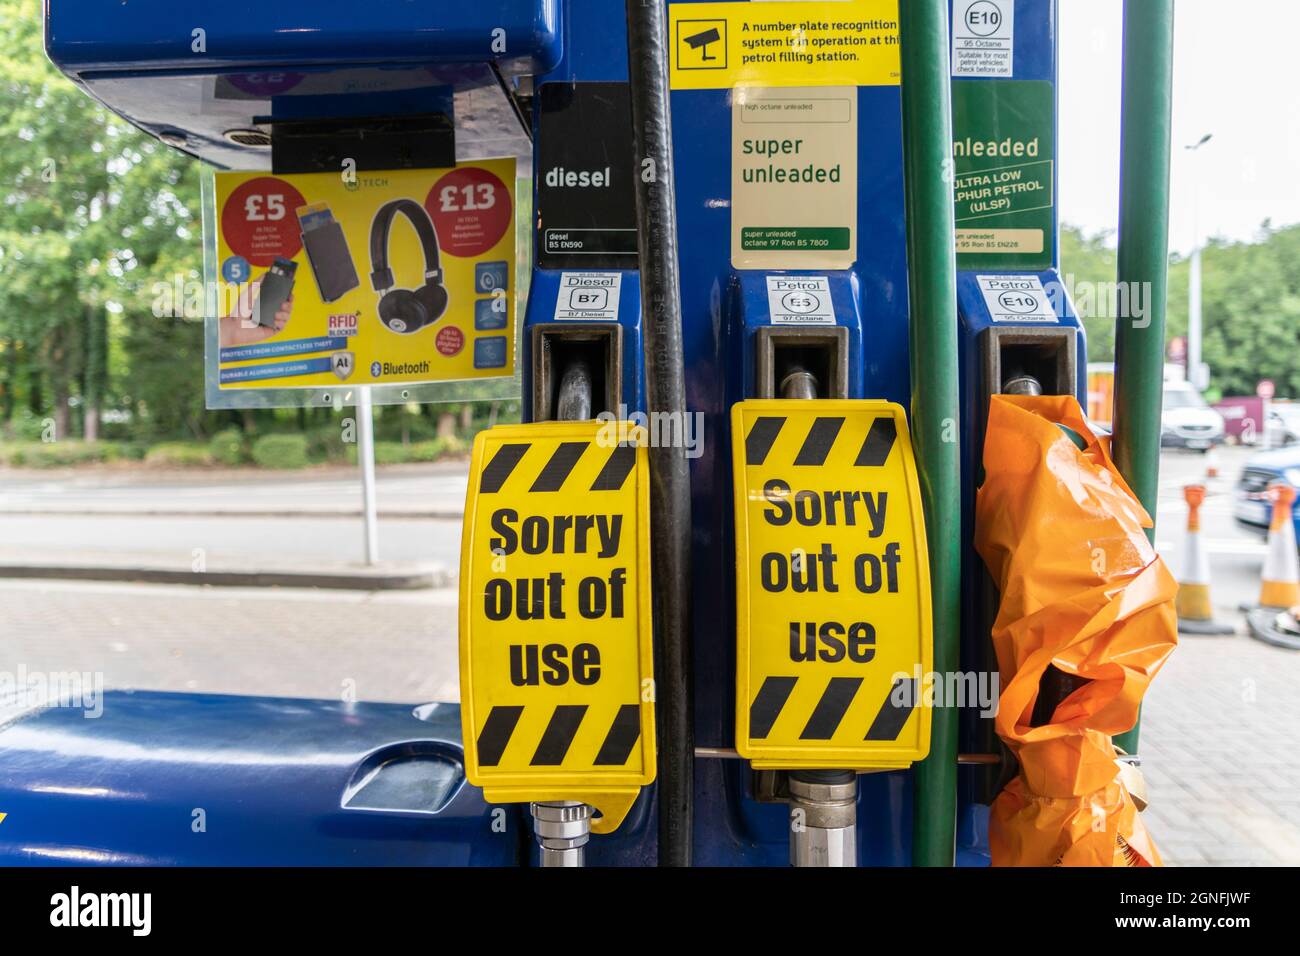 Sorry out of use signs at petrol station in Bury St Edmunds, Suffolk, UK. 25.09.21 Stock Photo